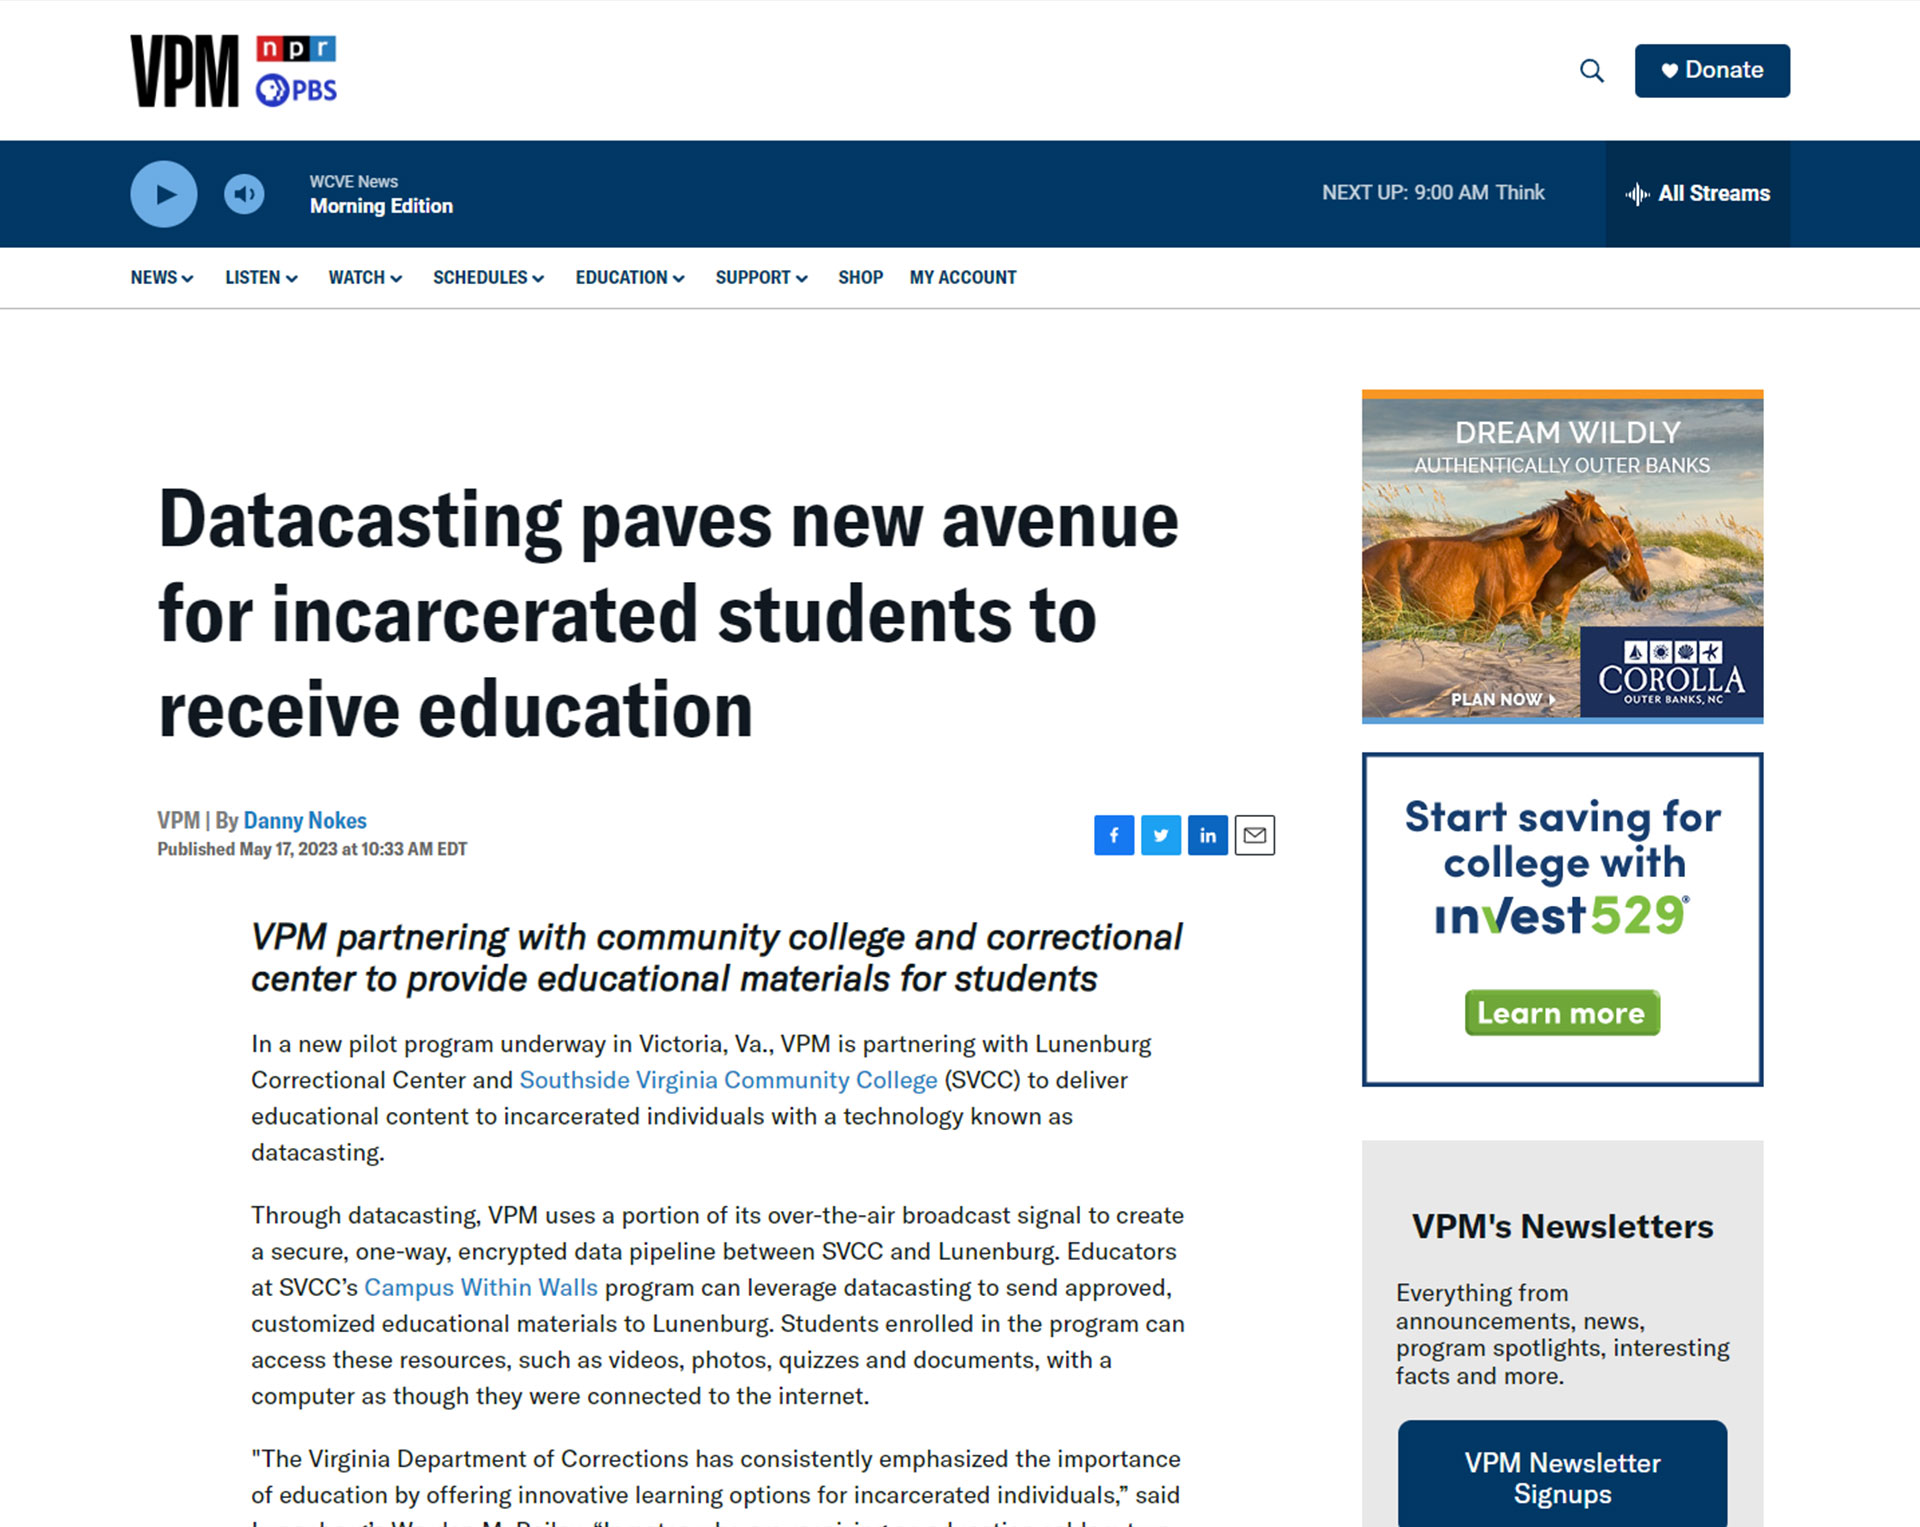 Datacasting paves new avenue for incarcerated students to receive education